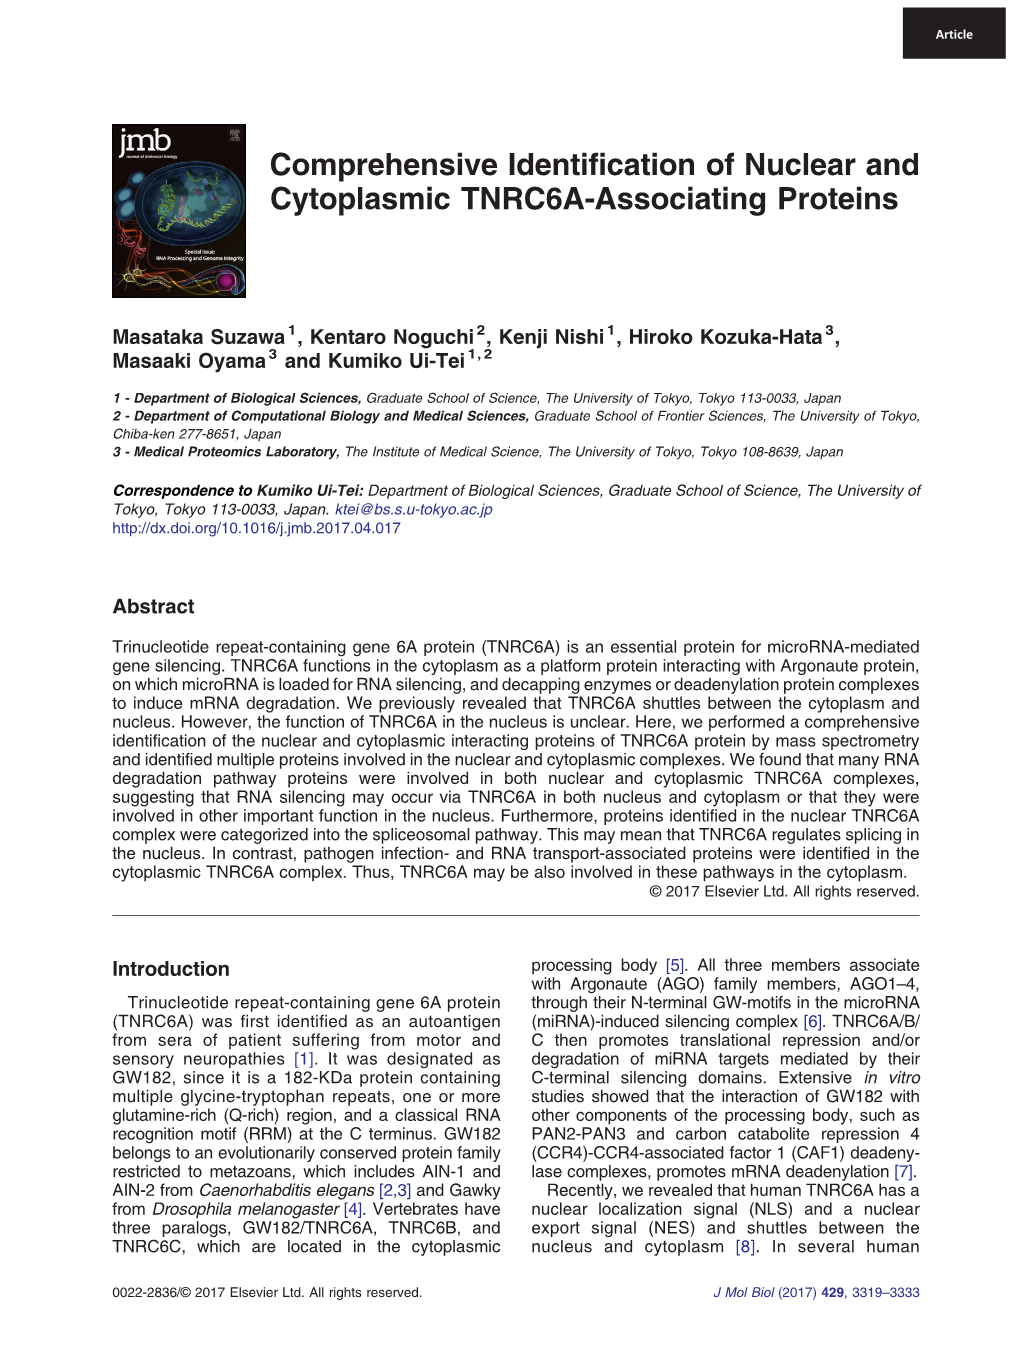 Comprehensive Identification of Nuclear and Cytoplasmic TNRC6A-Associating Proteins